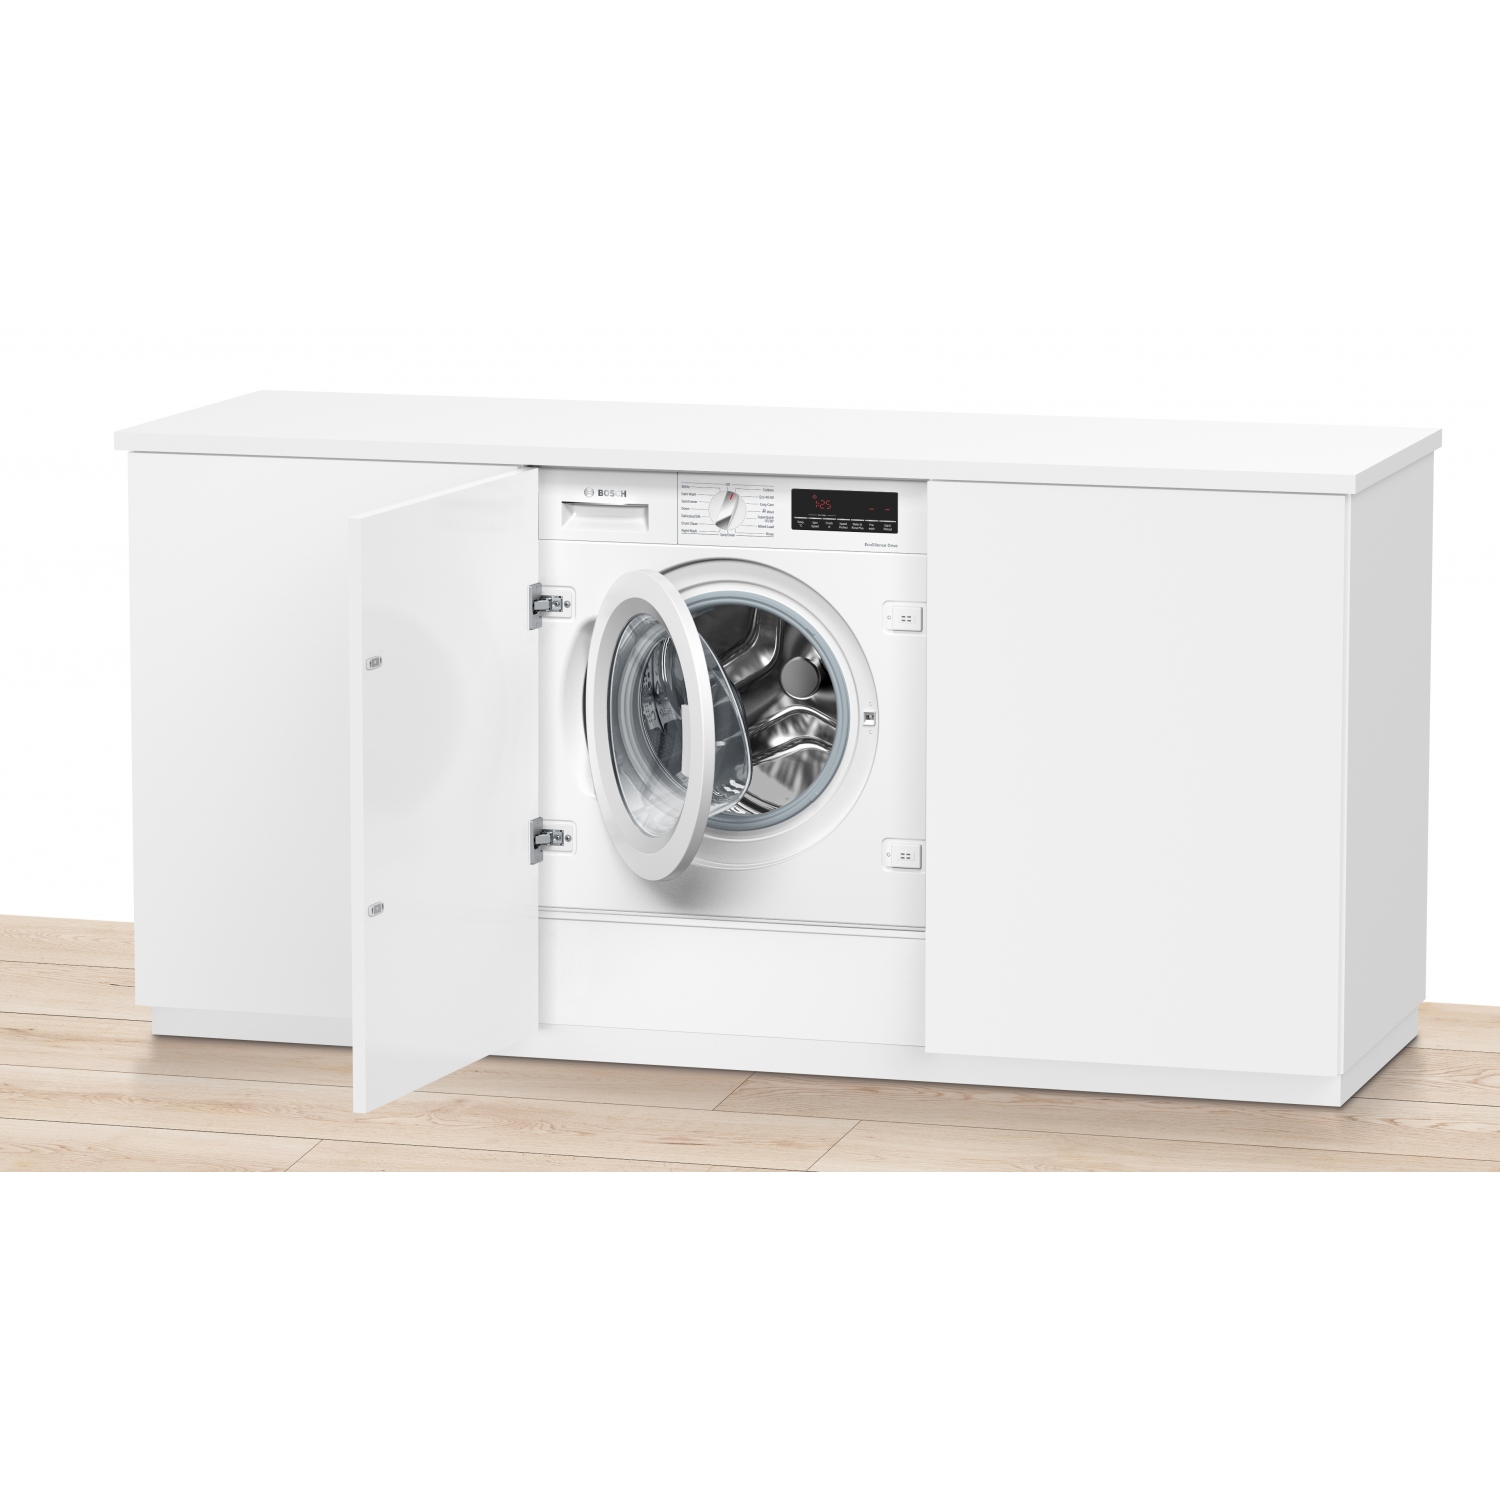 Bosch Serie 8 WIW28501GB Integrated Washing Machine 8kg Load 400rpm Spin - 2